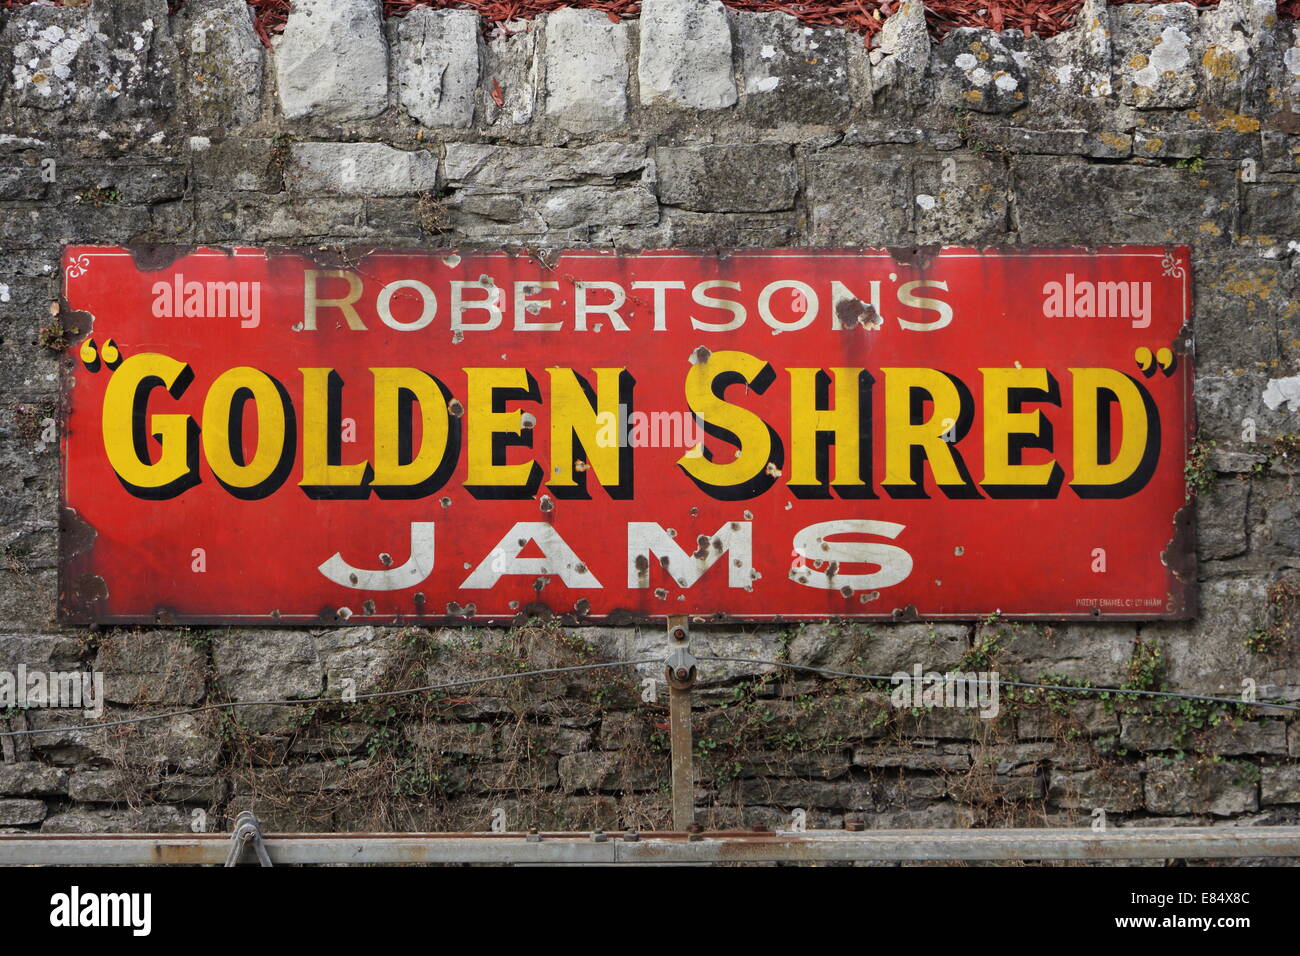 Old metal railway advertising board for Golden Shred Jam  with gold and white letters on a red background Stock Photo